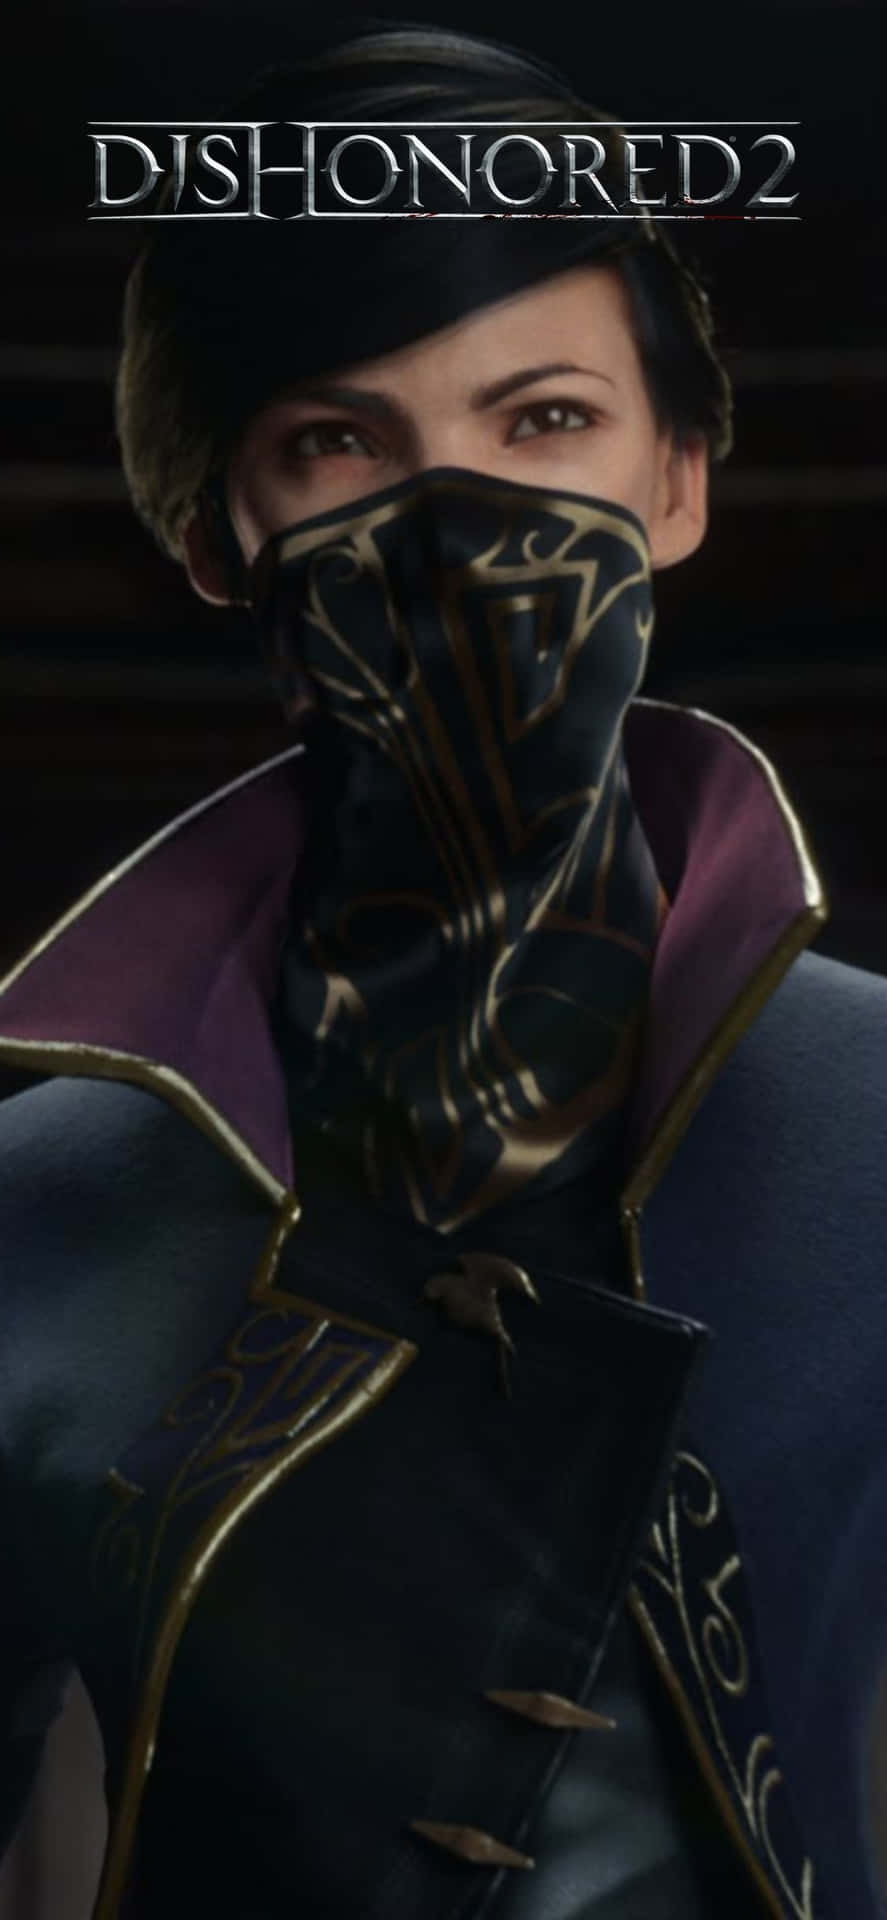 dishonored 2 - a character with a mask on